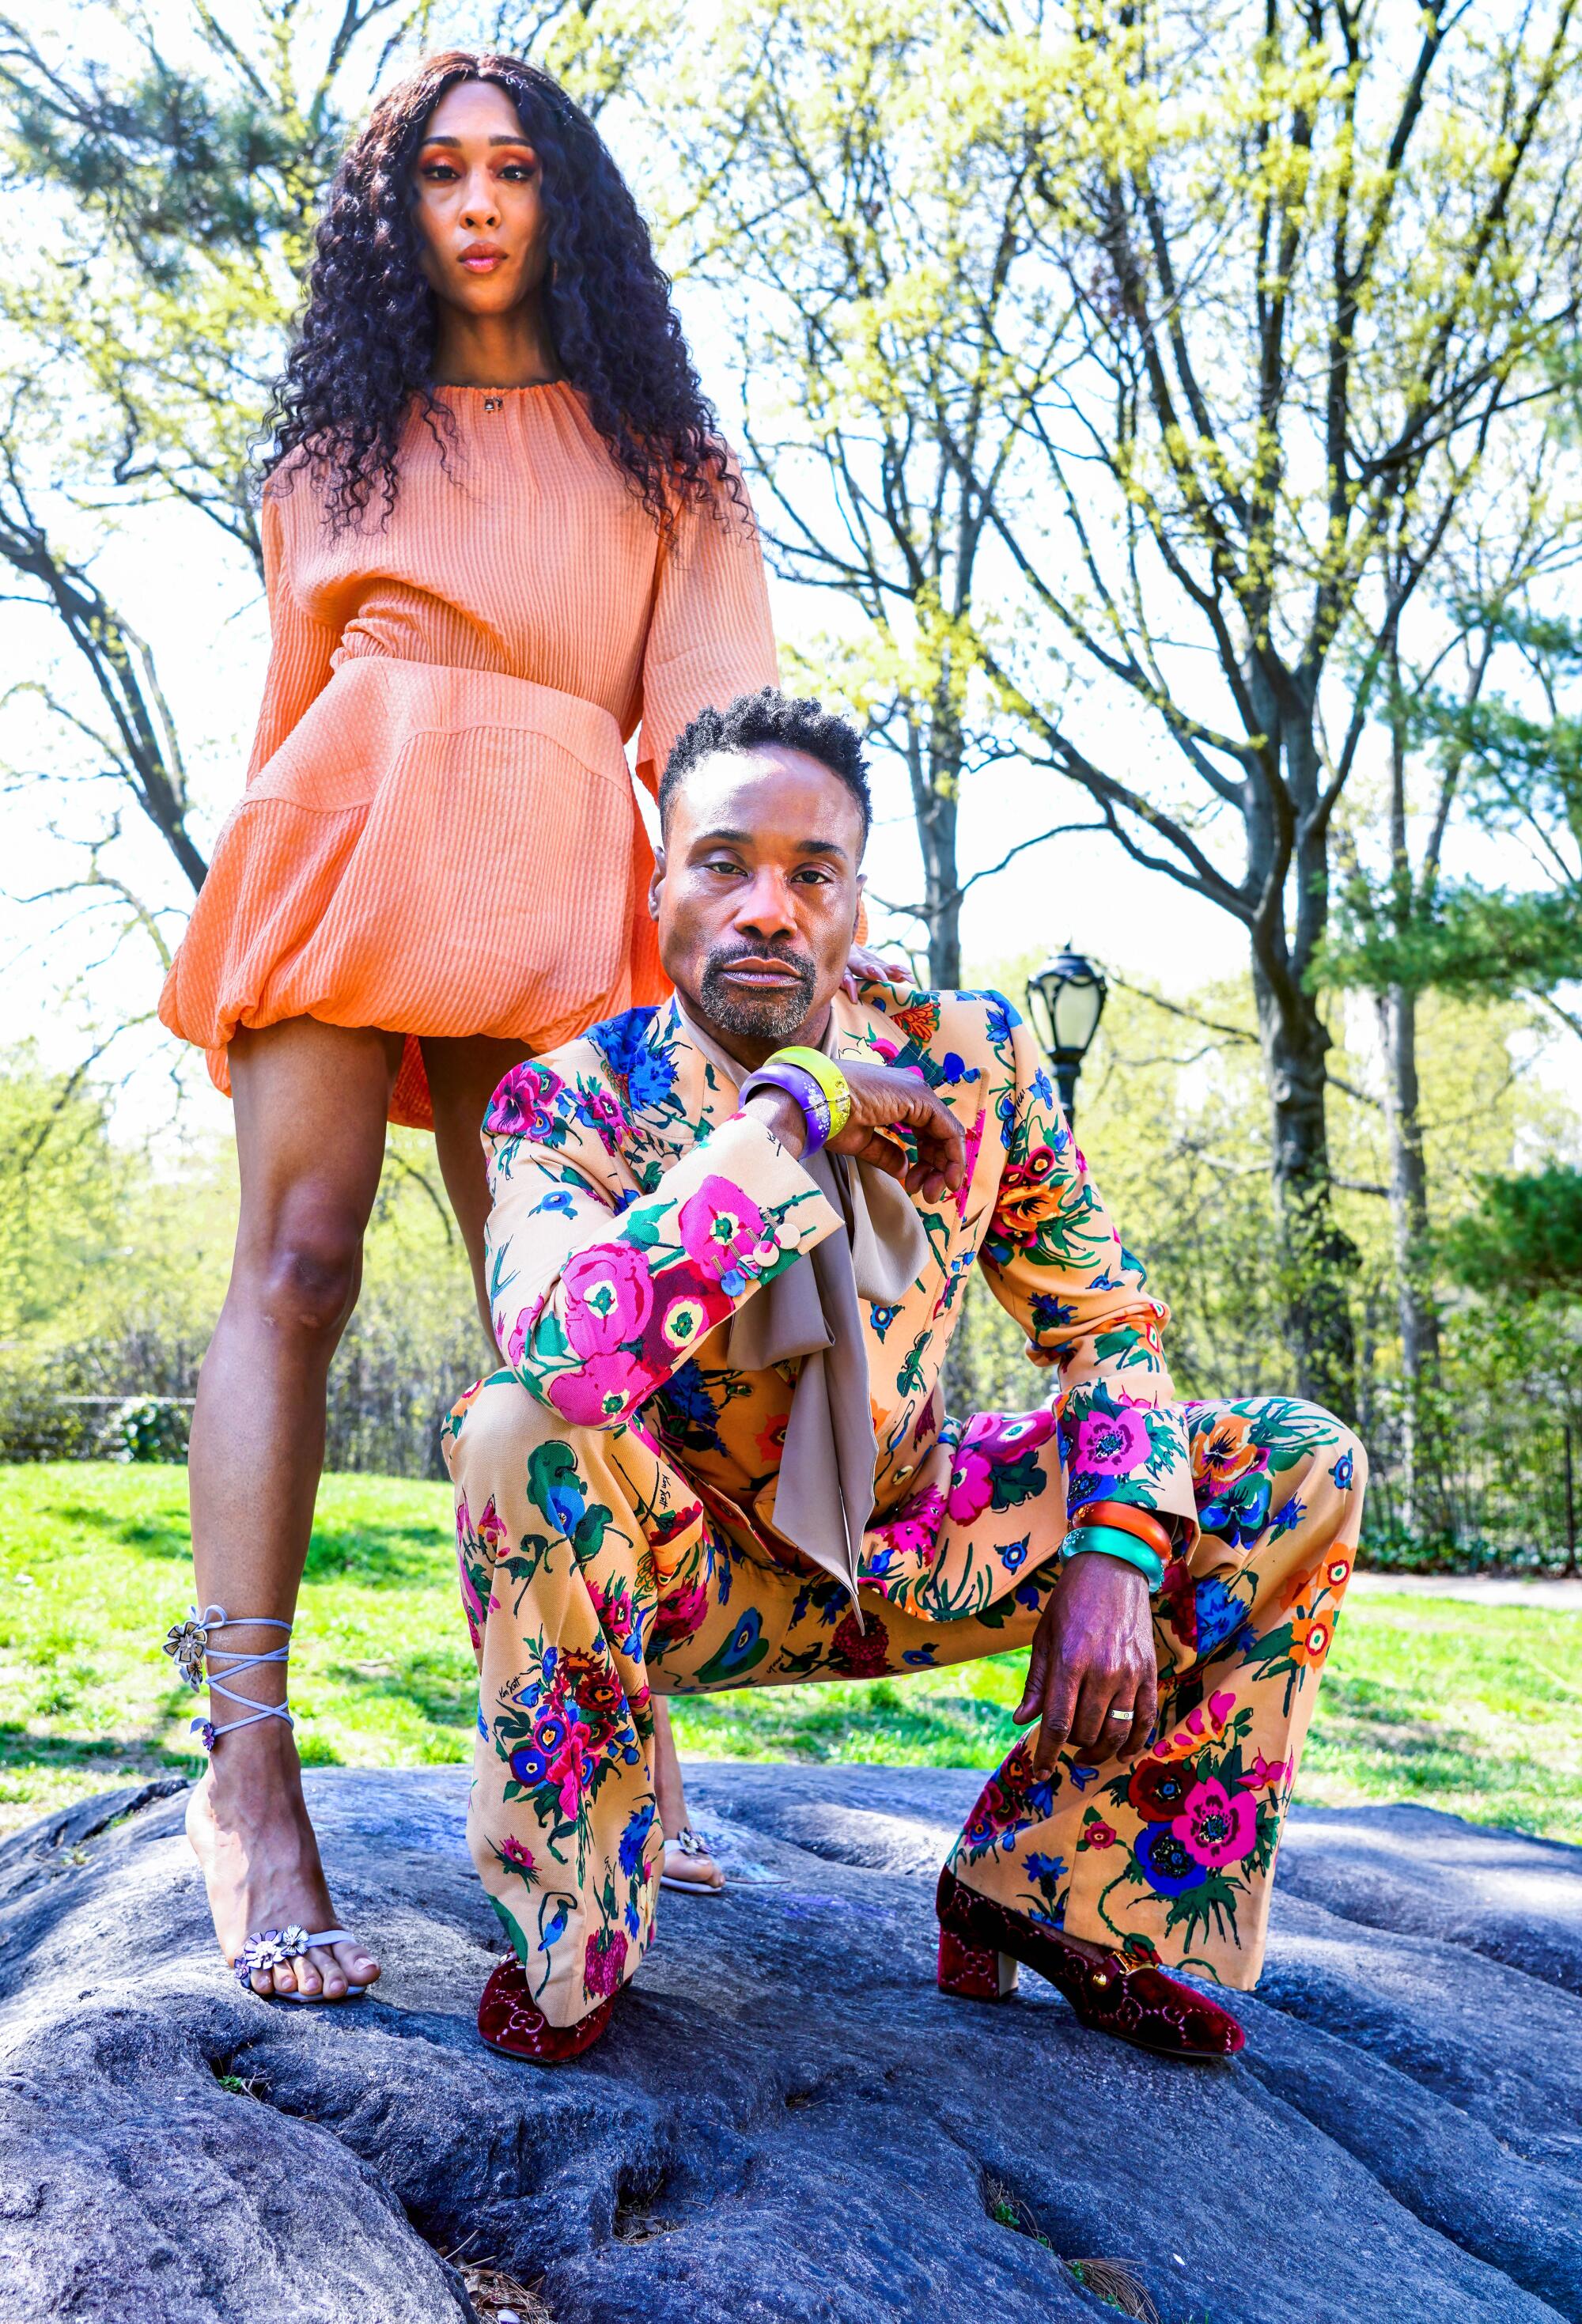 Billy Porter kneels in a flowered suit as Mj Rodriguez stands behind him in a short peach dress and sandals.